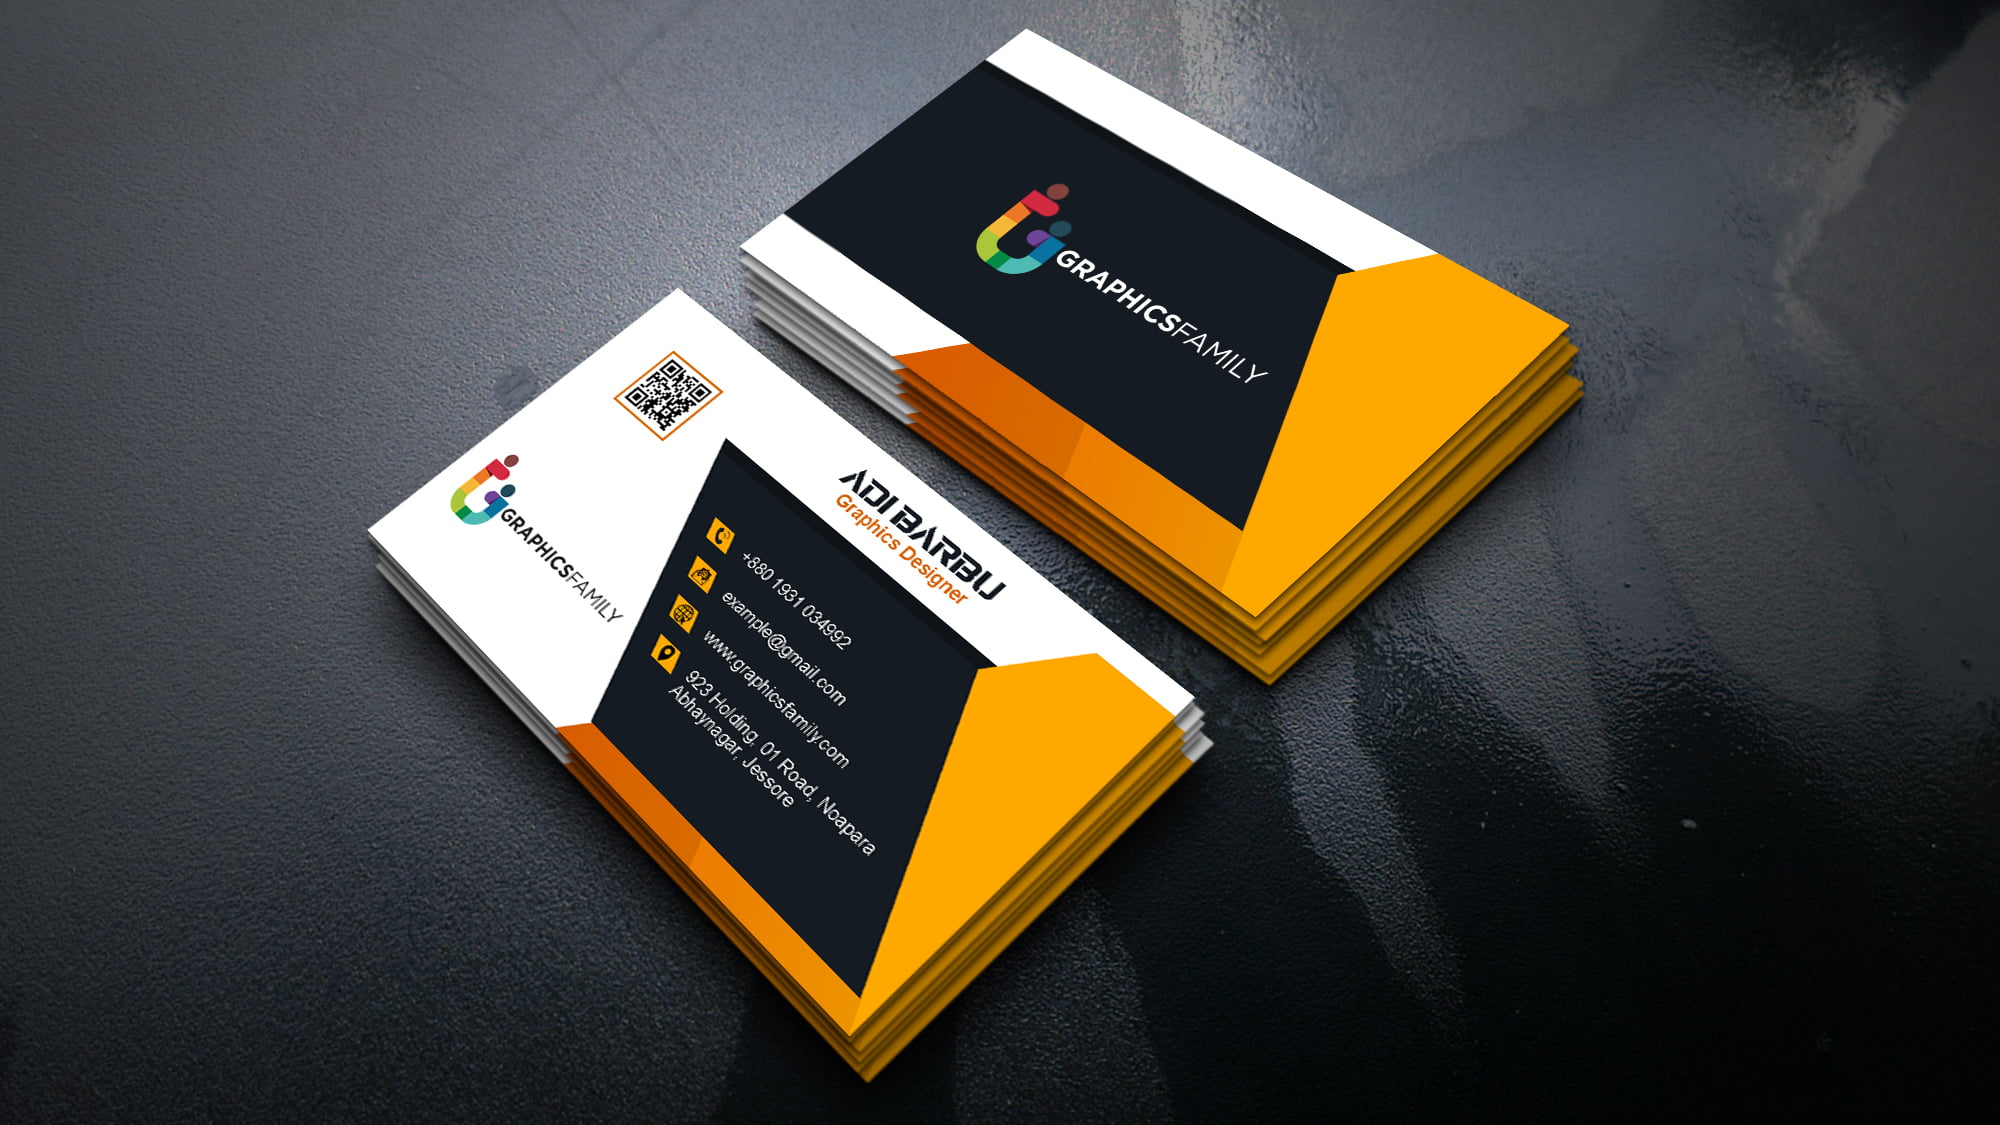 Top Quality Modern Business Card Template – GraphicsFamily